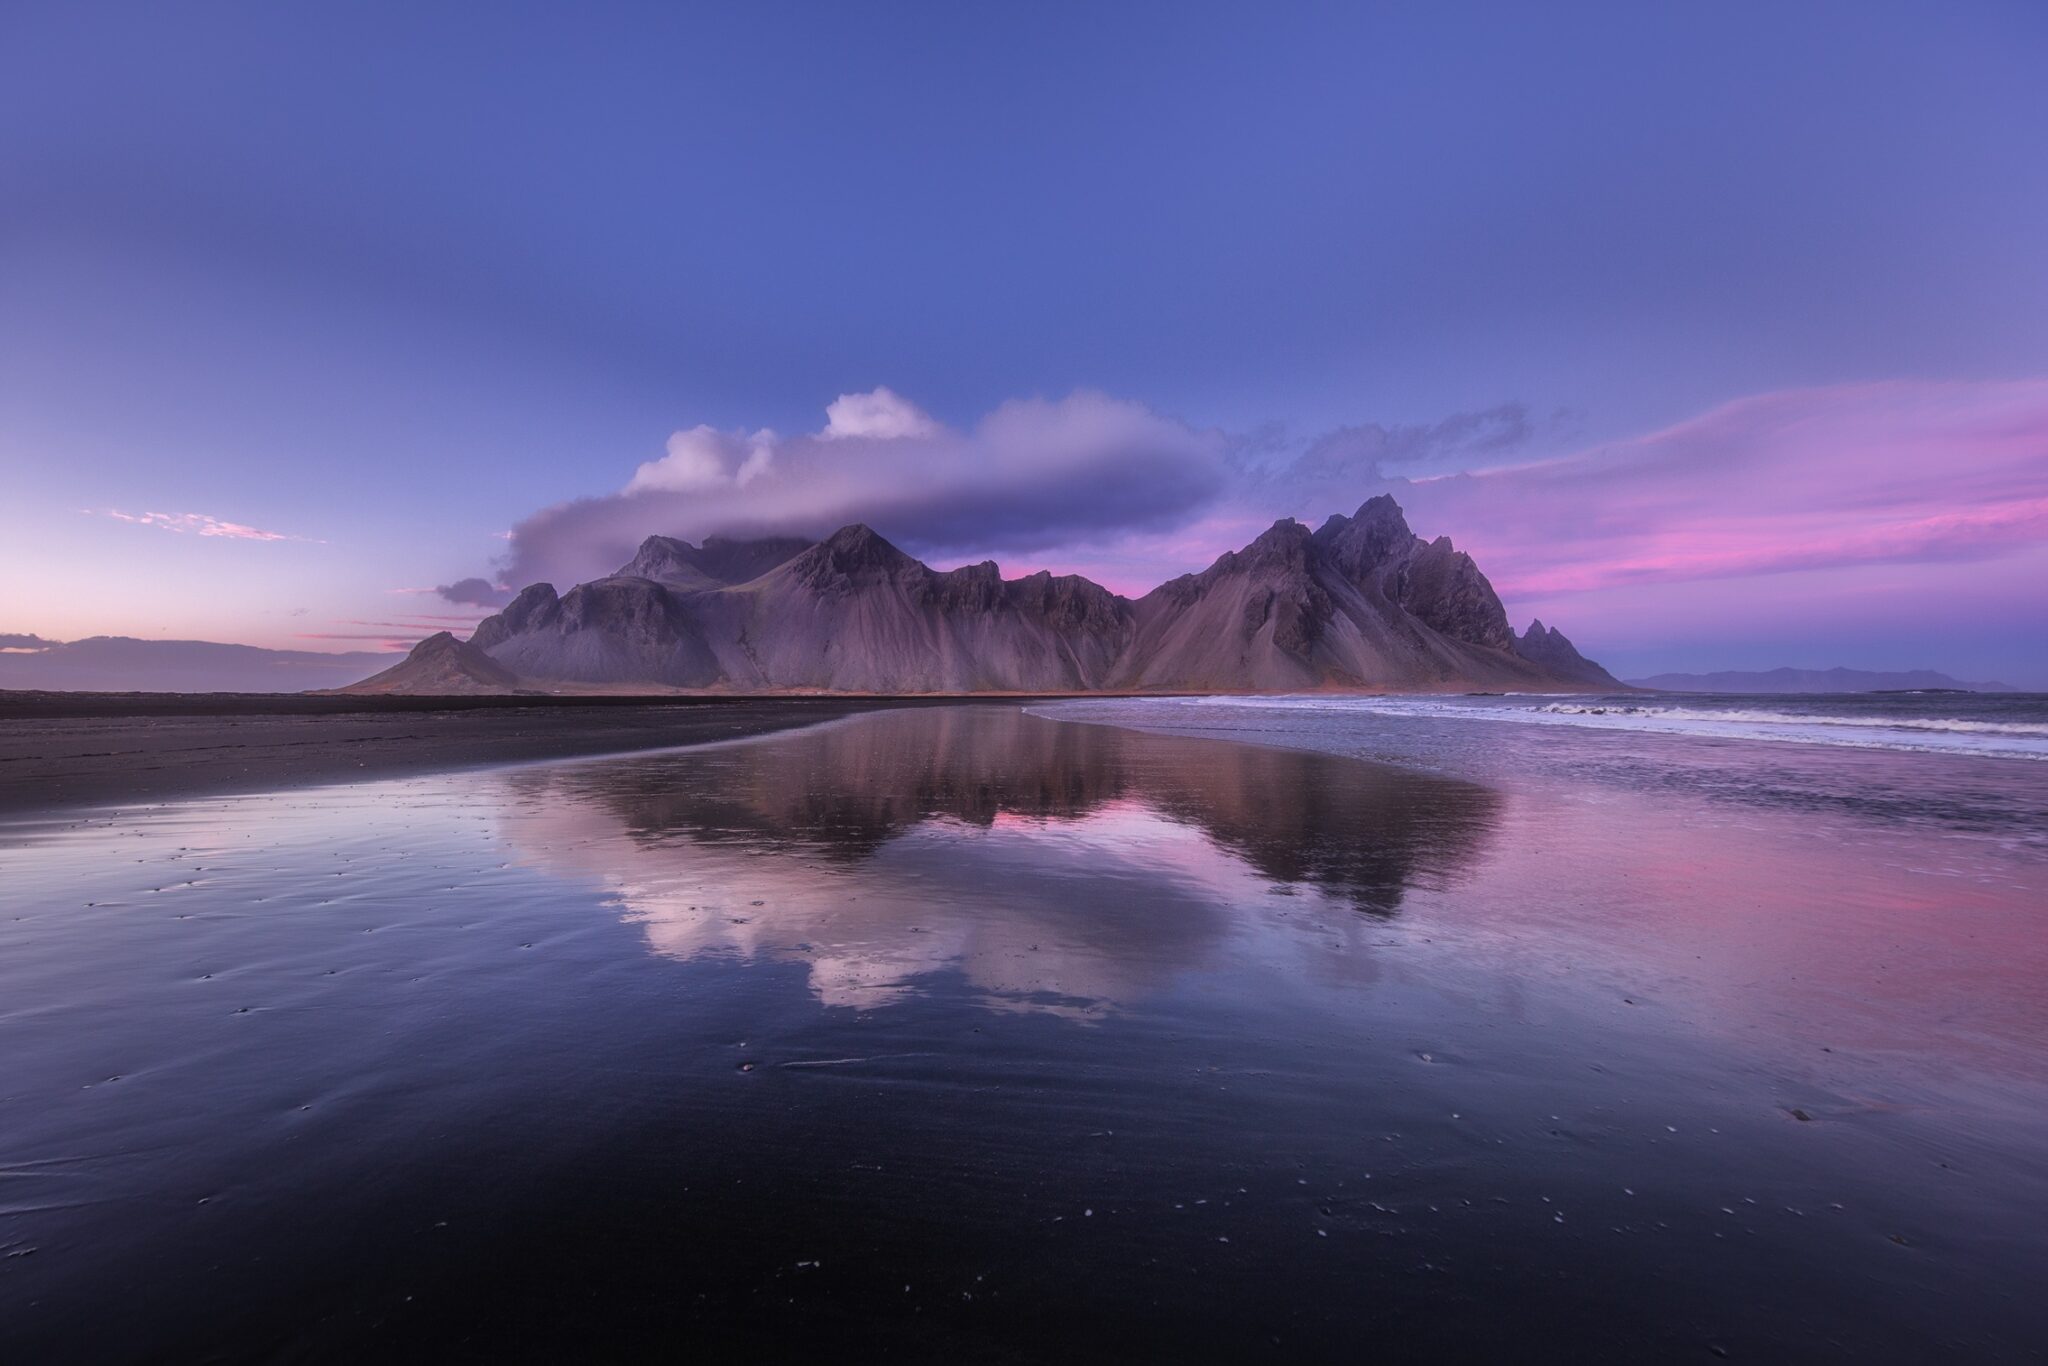 A purple and pink sky surrounds a mountain range in Iceland. The scene is reflected in the water that the mountains stand beside.